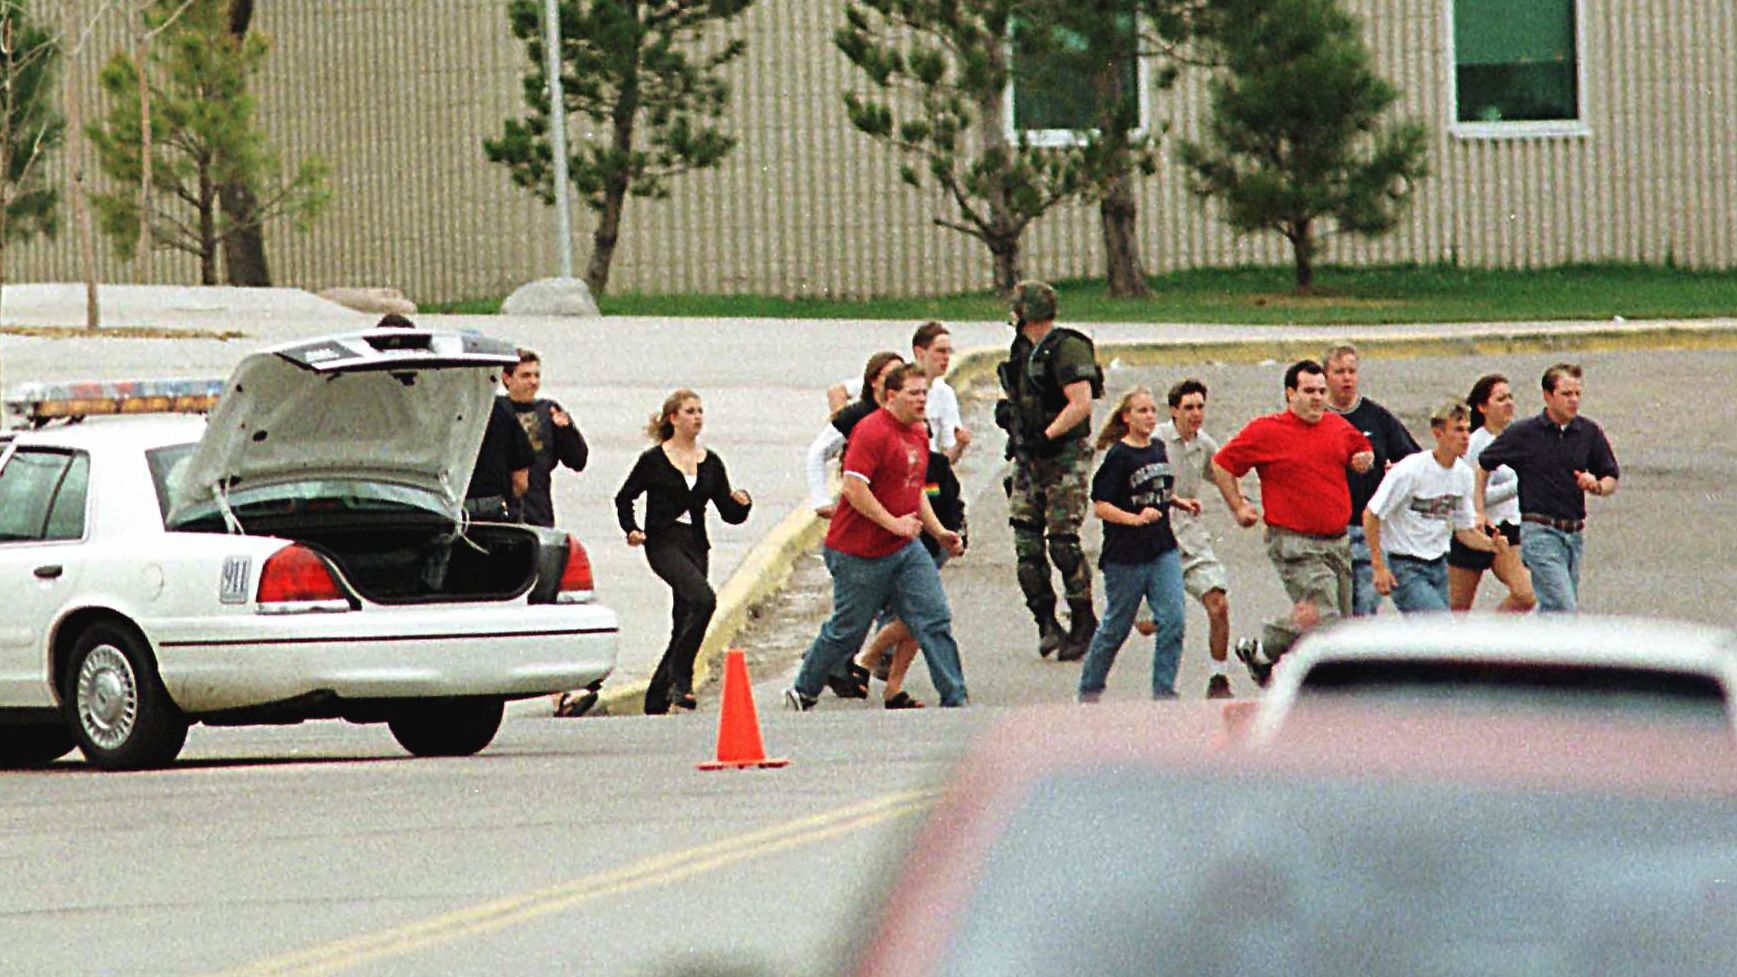 Columbine High School students run from the campus under police cover on April 20, 1999.